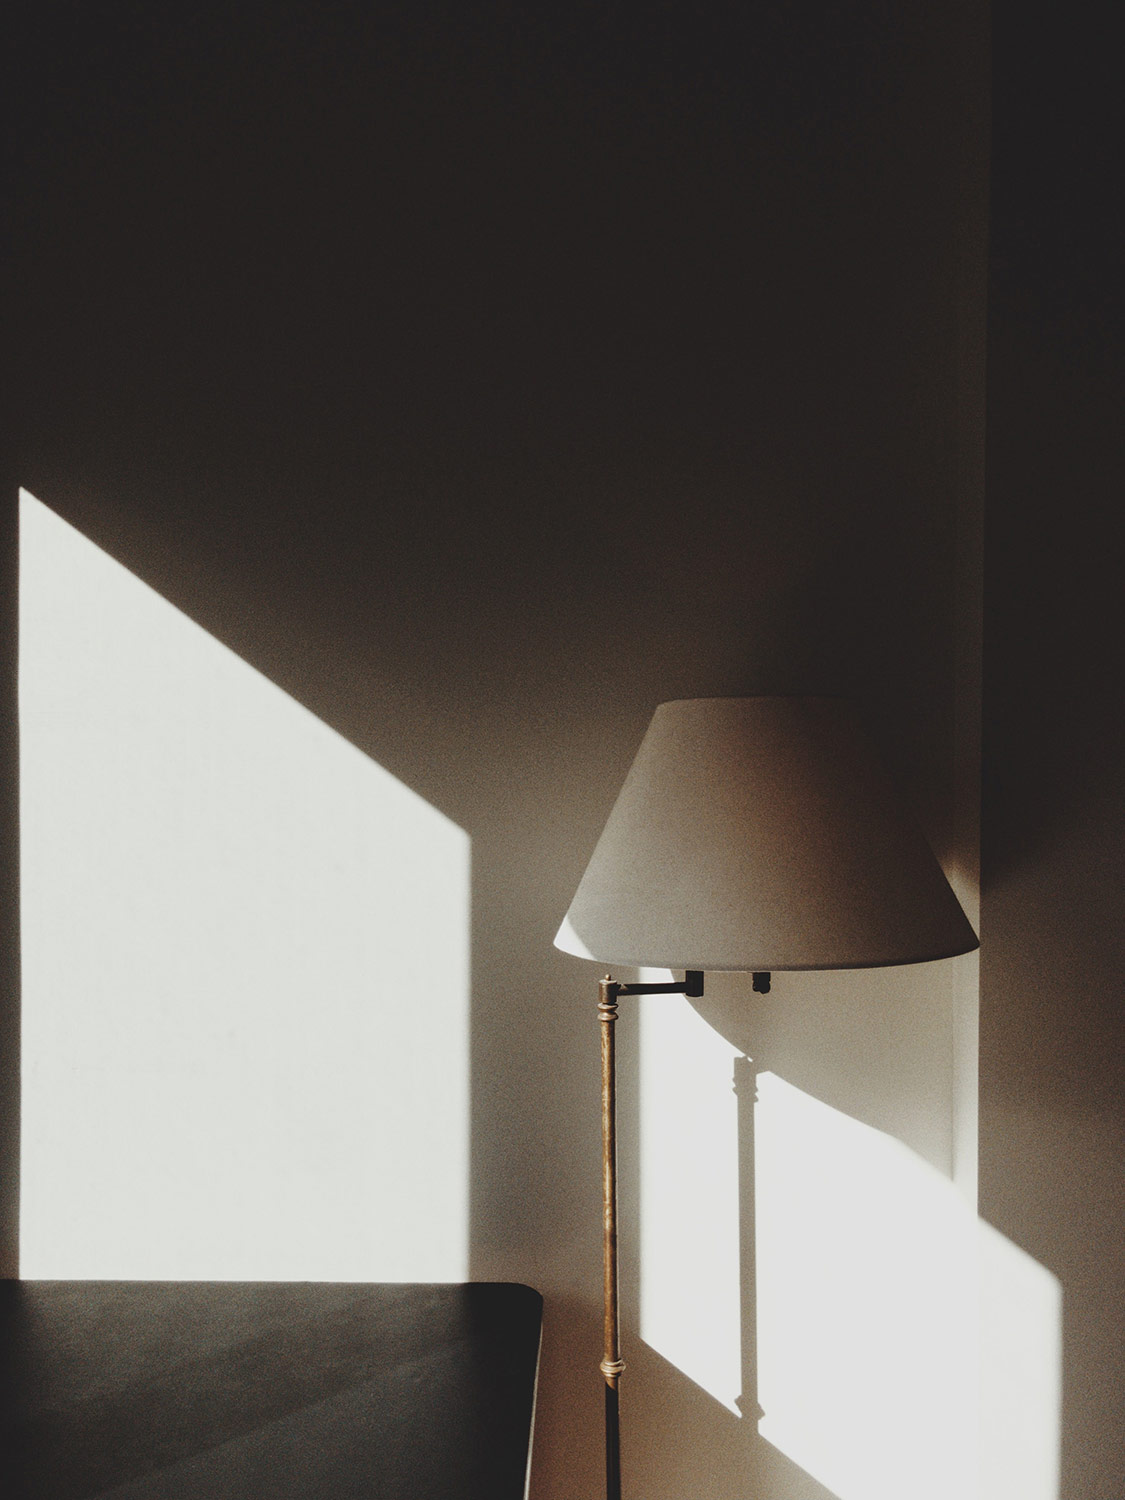 White lamp next to a black desk with sunlight shining through